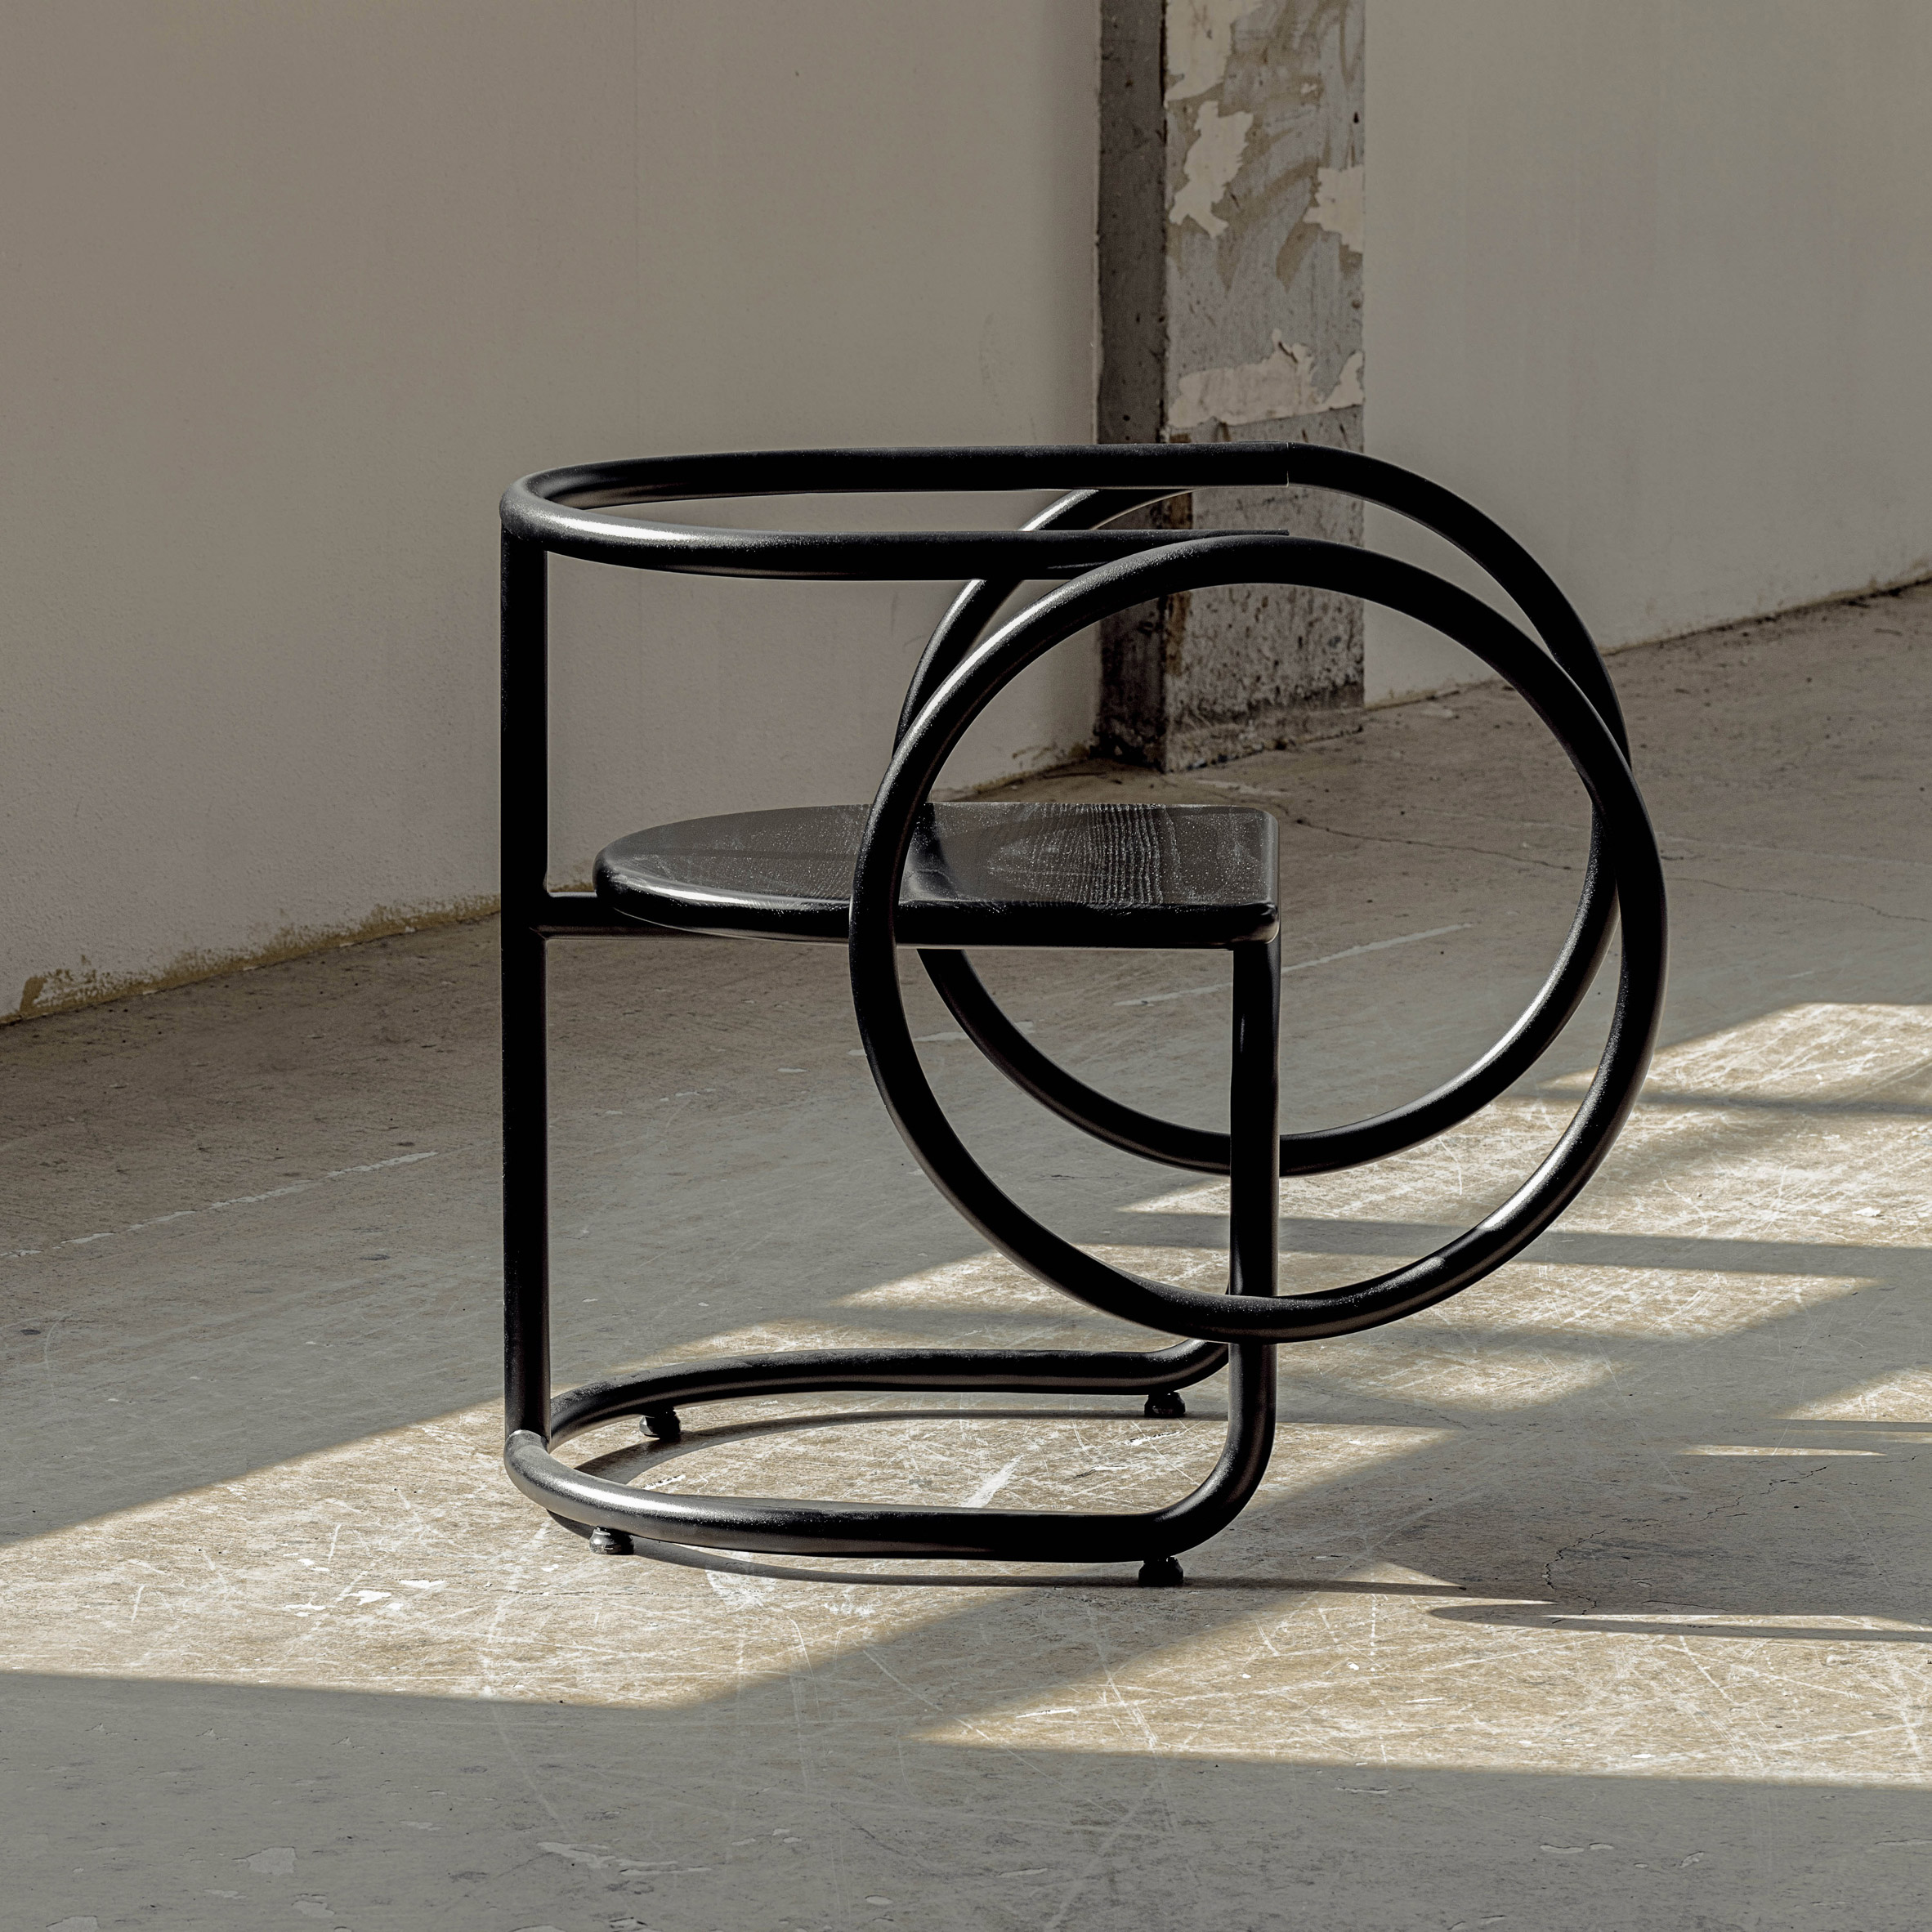 Hoop Chair from the Korean Art Deco collection